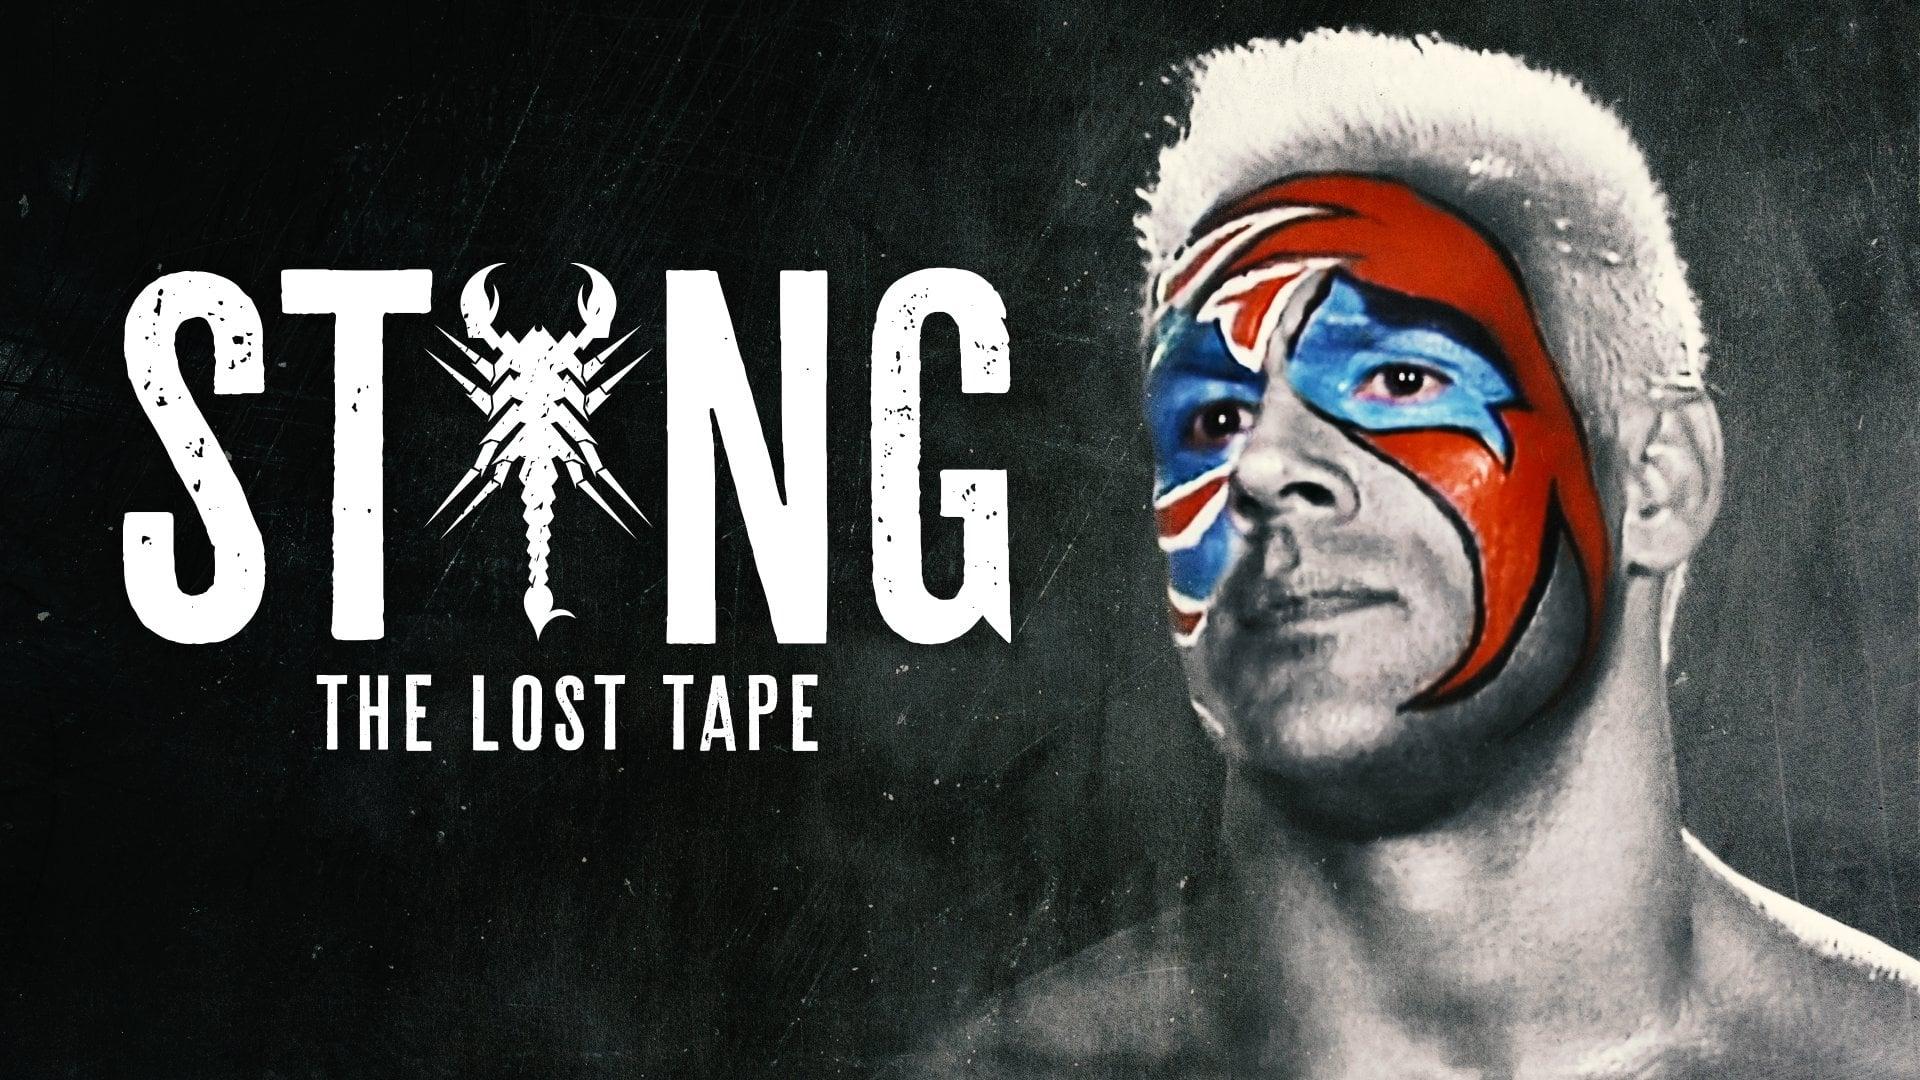 Sting: The Lost Tape backdrop